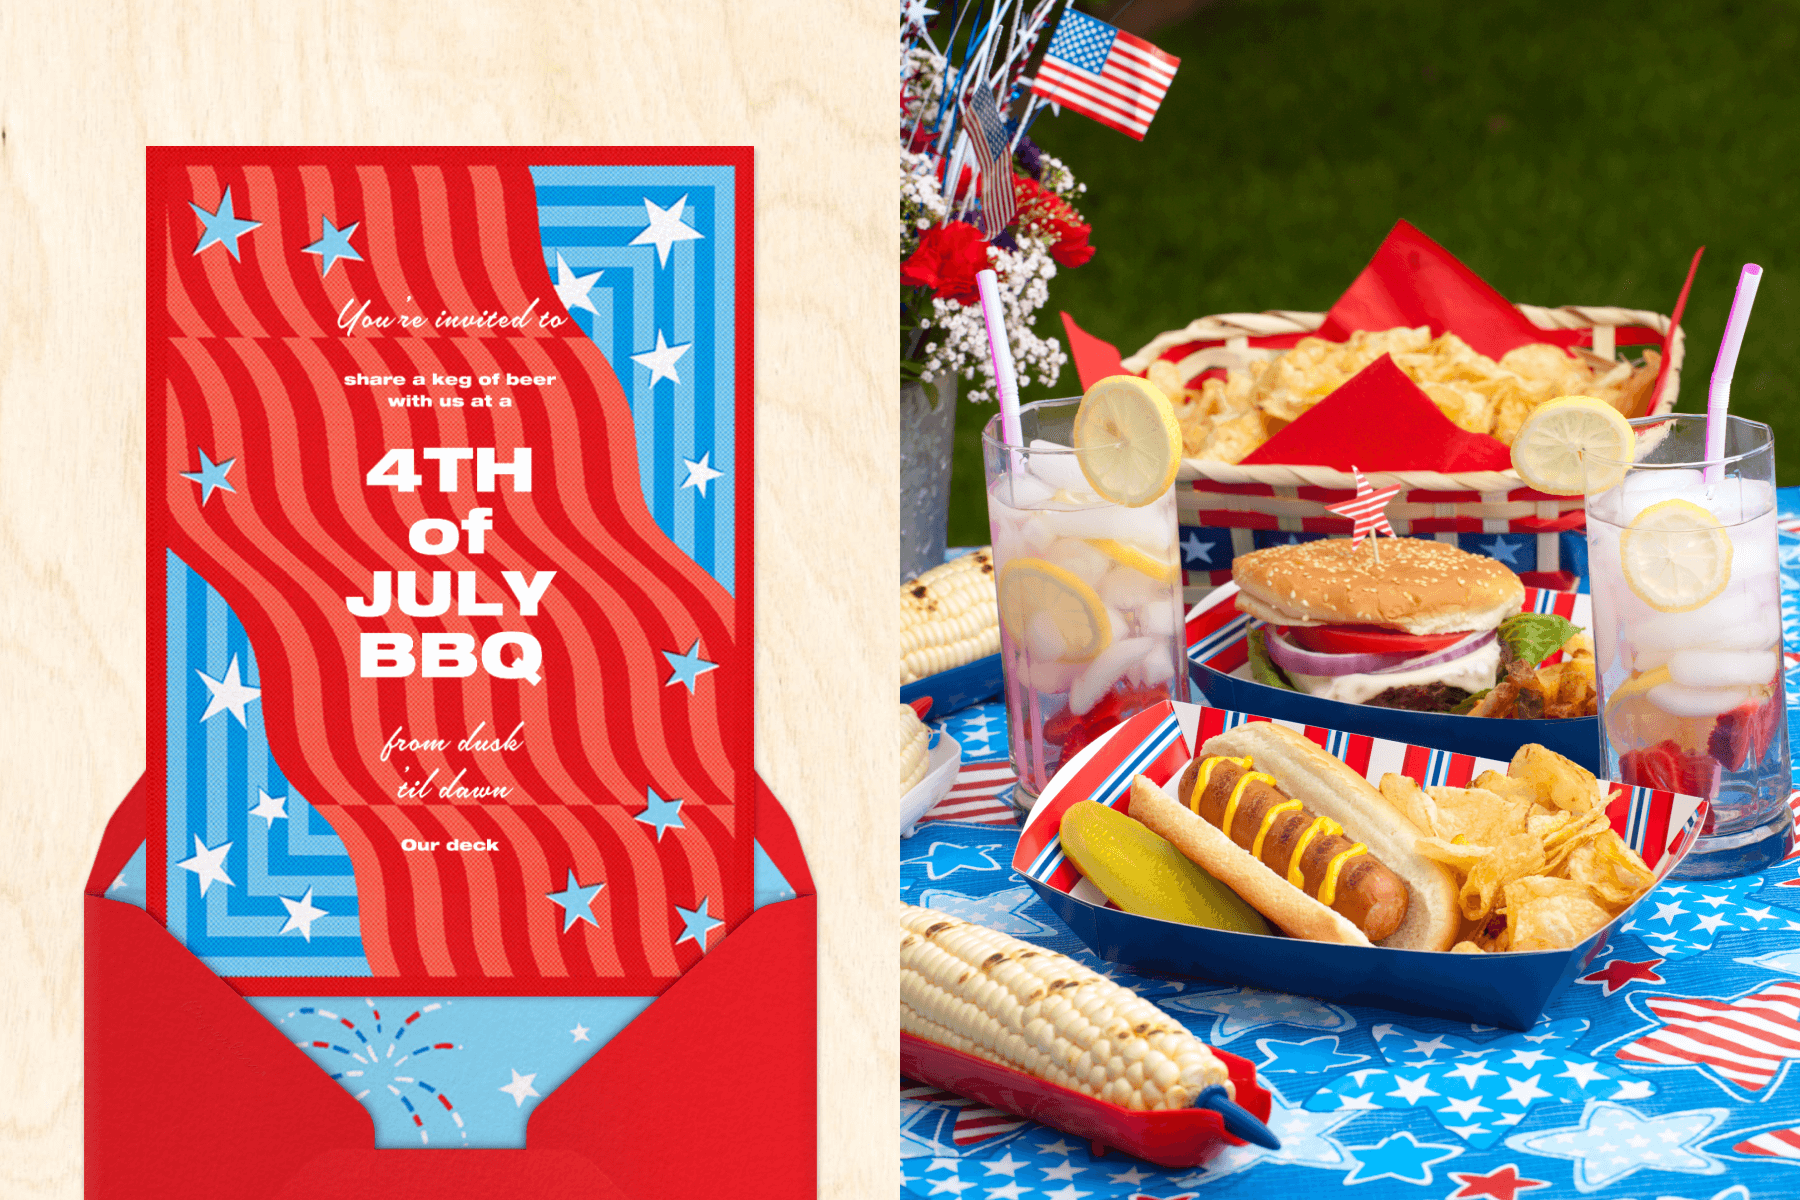 An invitation with a wavy, red striped banner on a blue striped background and a red envelope with fireworks liner; a spread of cookout foods (corn, hotdog, burger, cold drinks) with American flag motifs on an outdoor table.